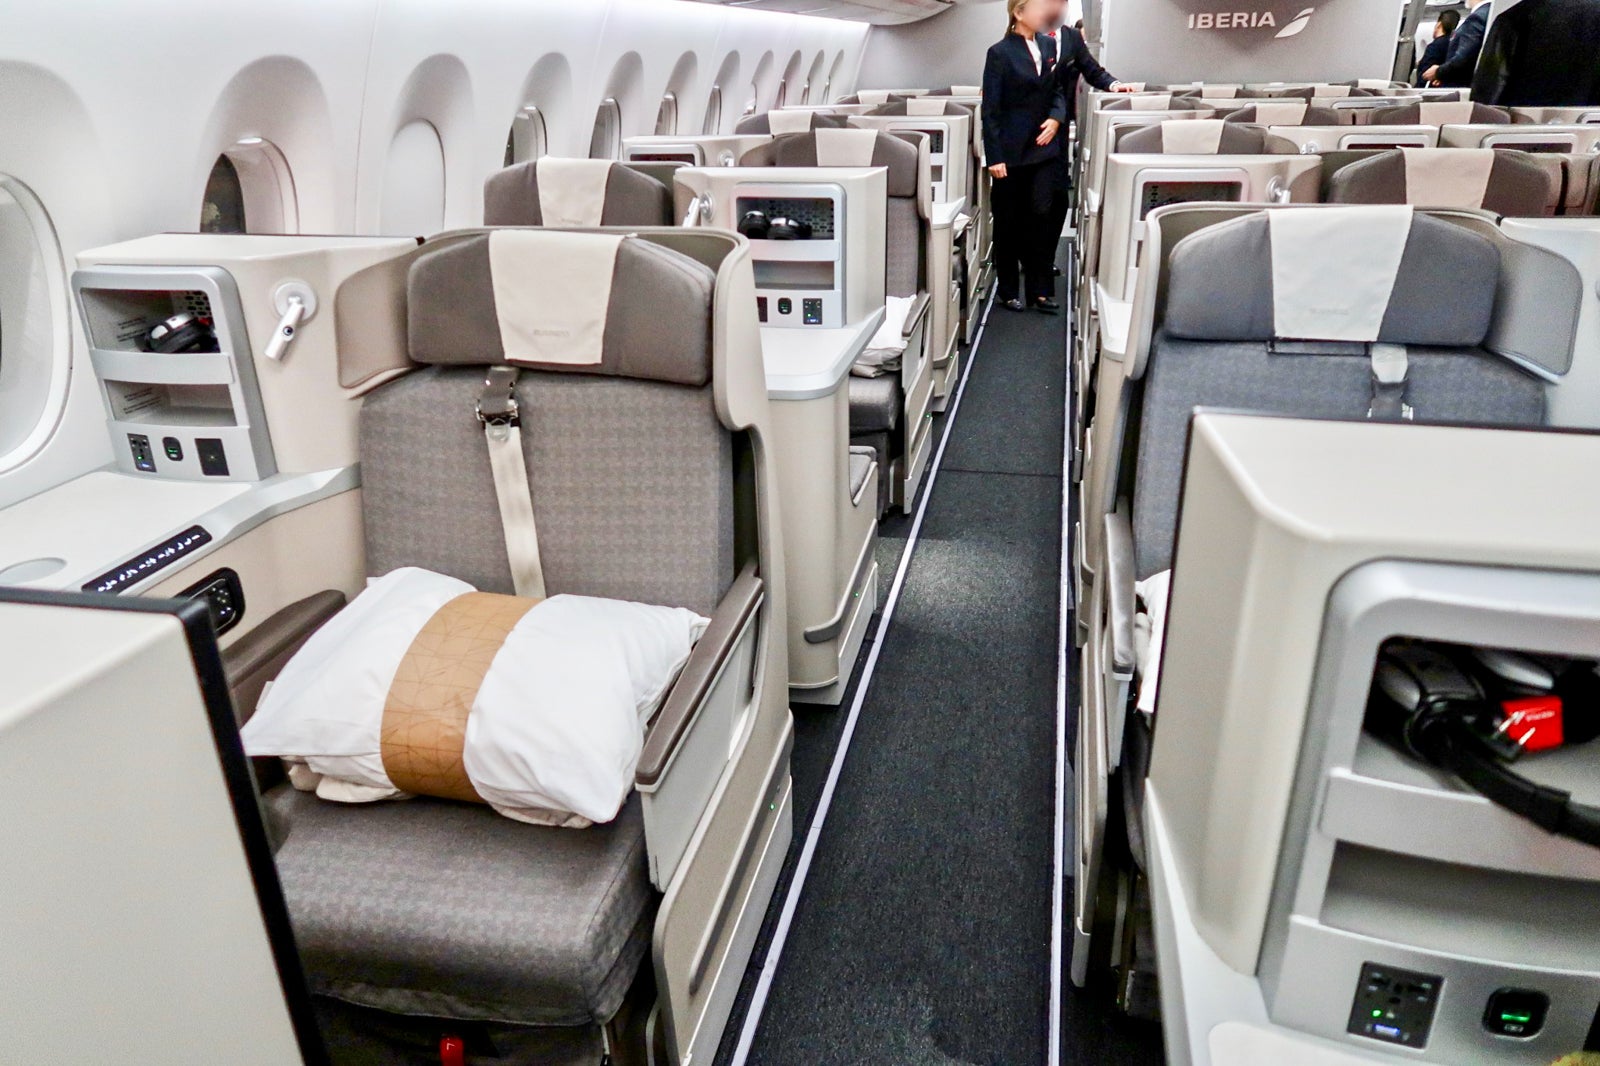 1. Premium Economy Cabin Features and Layout